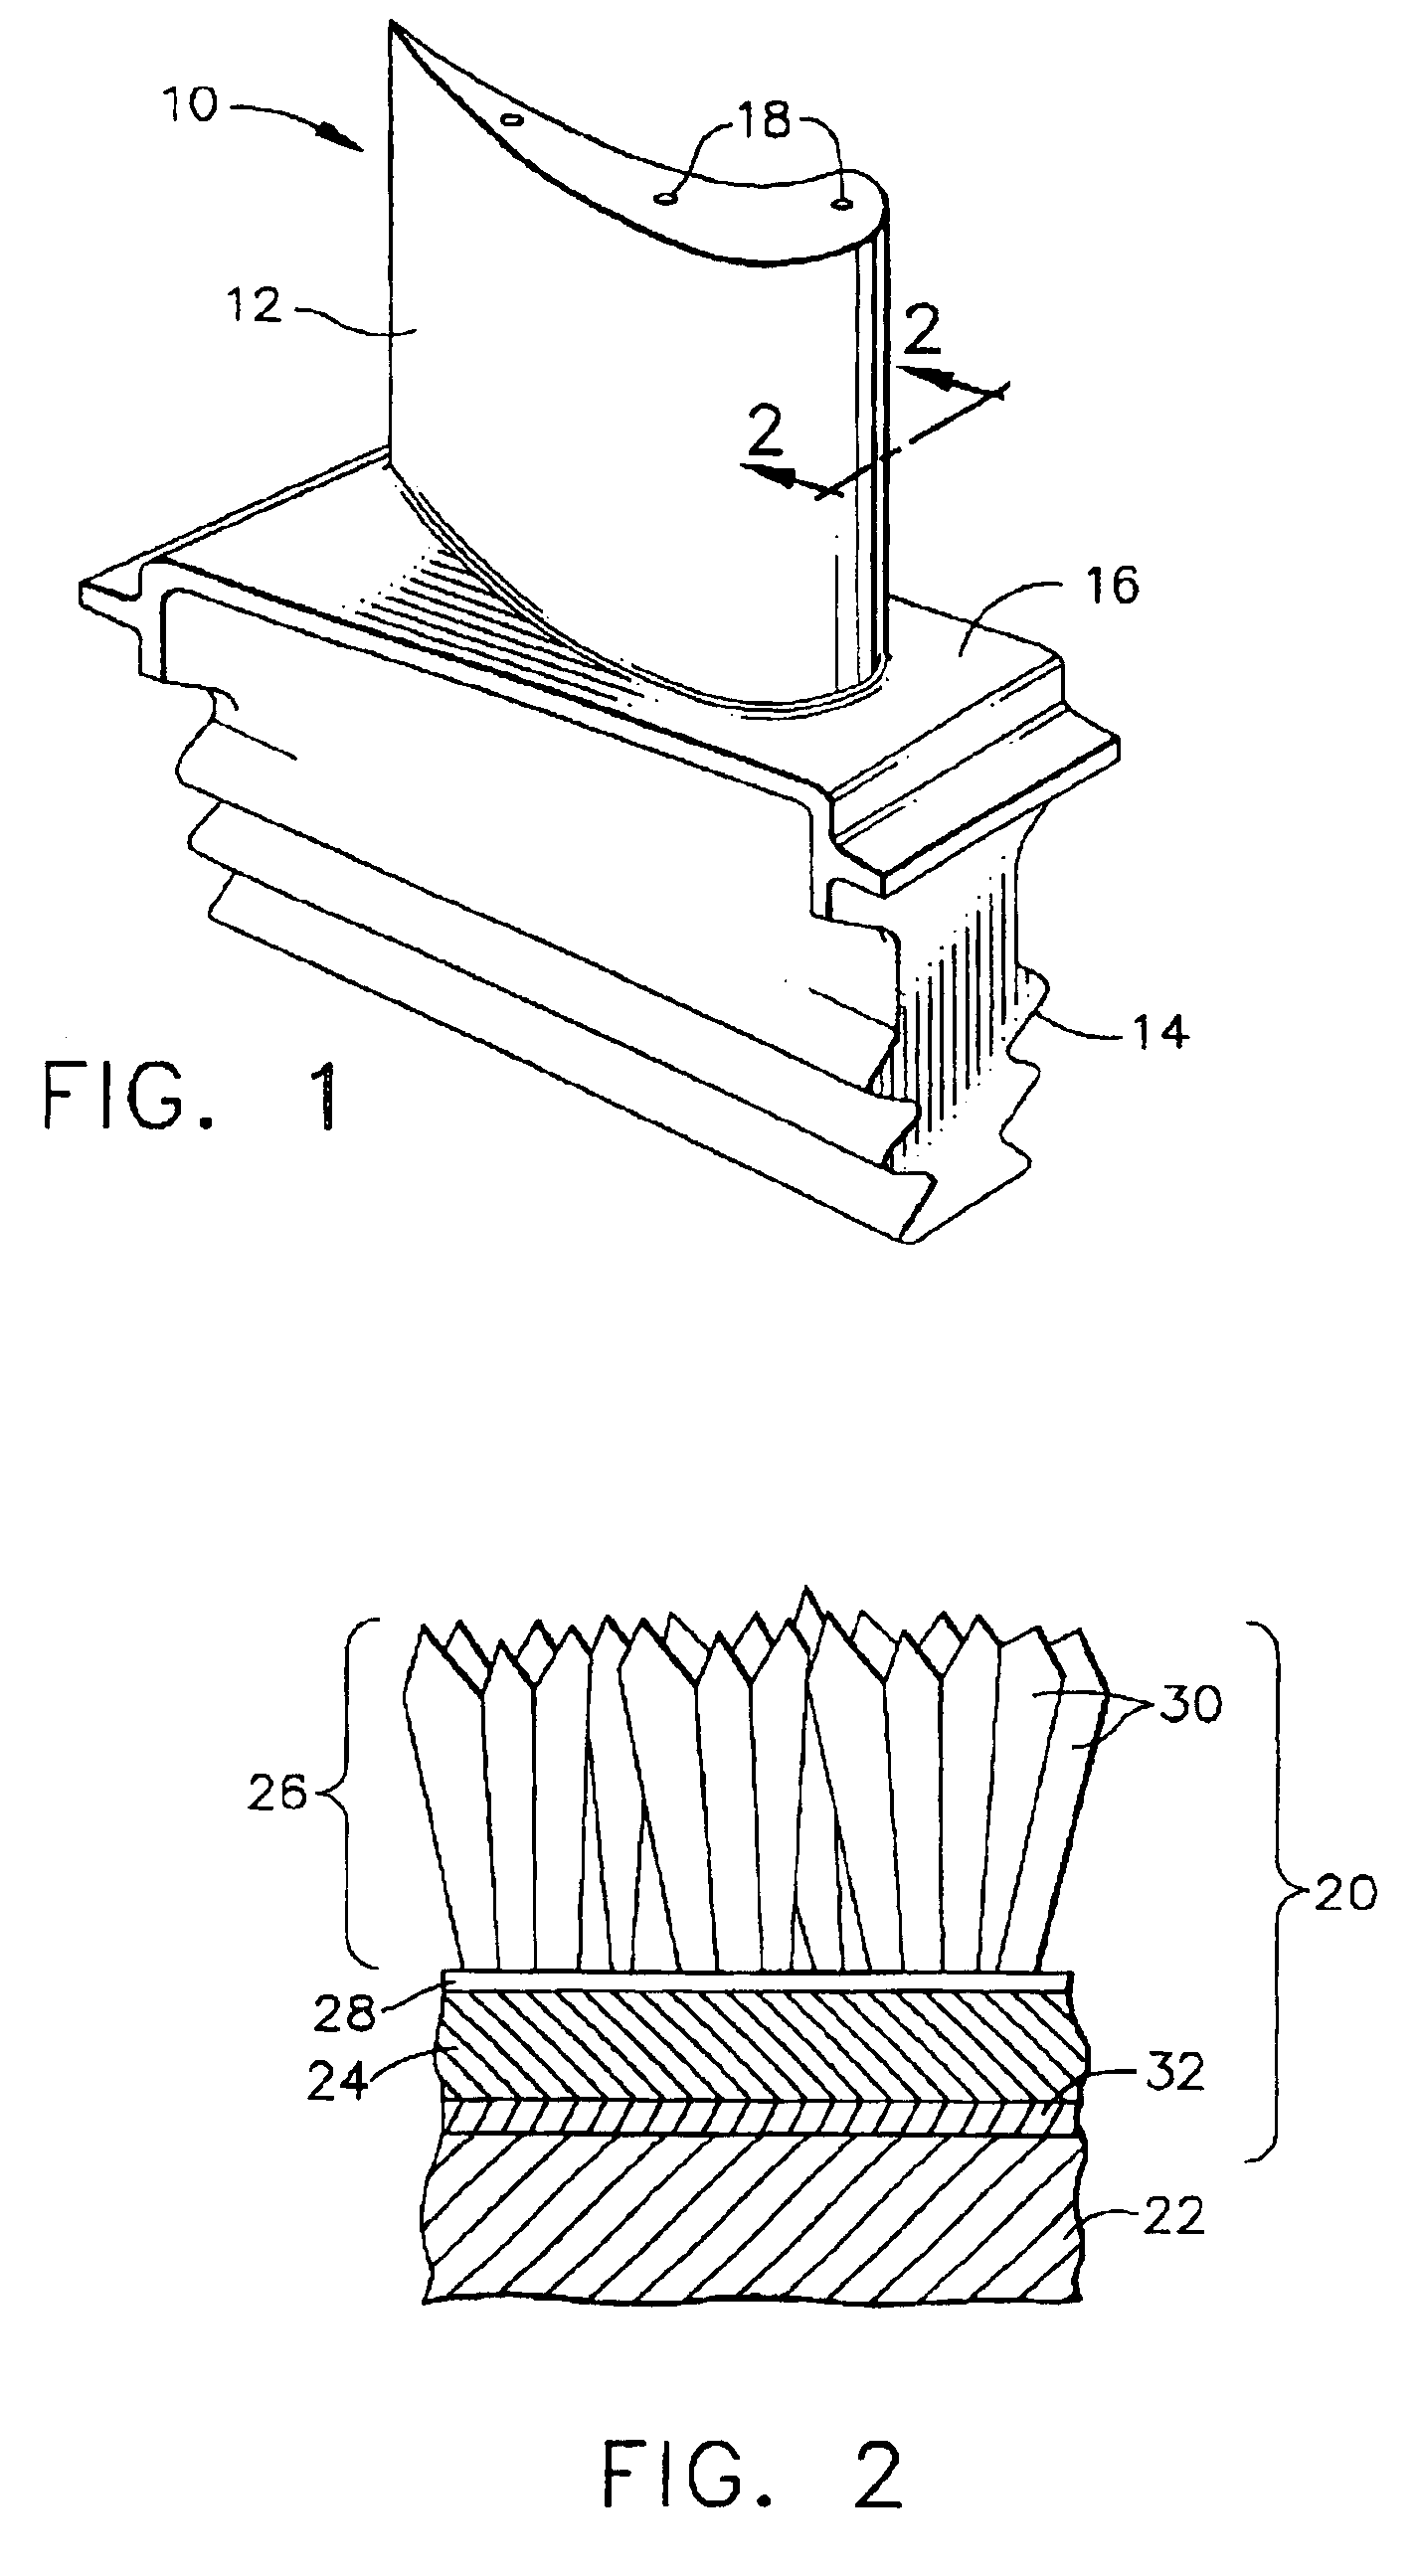 Ni-Base superalloy having a coating system containing a diffusion barrier layer